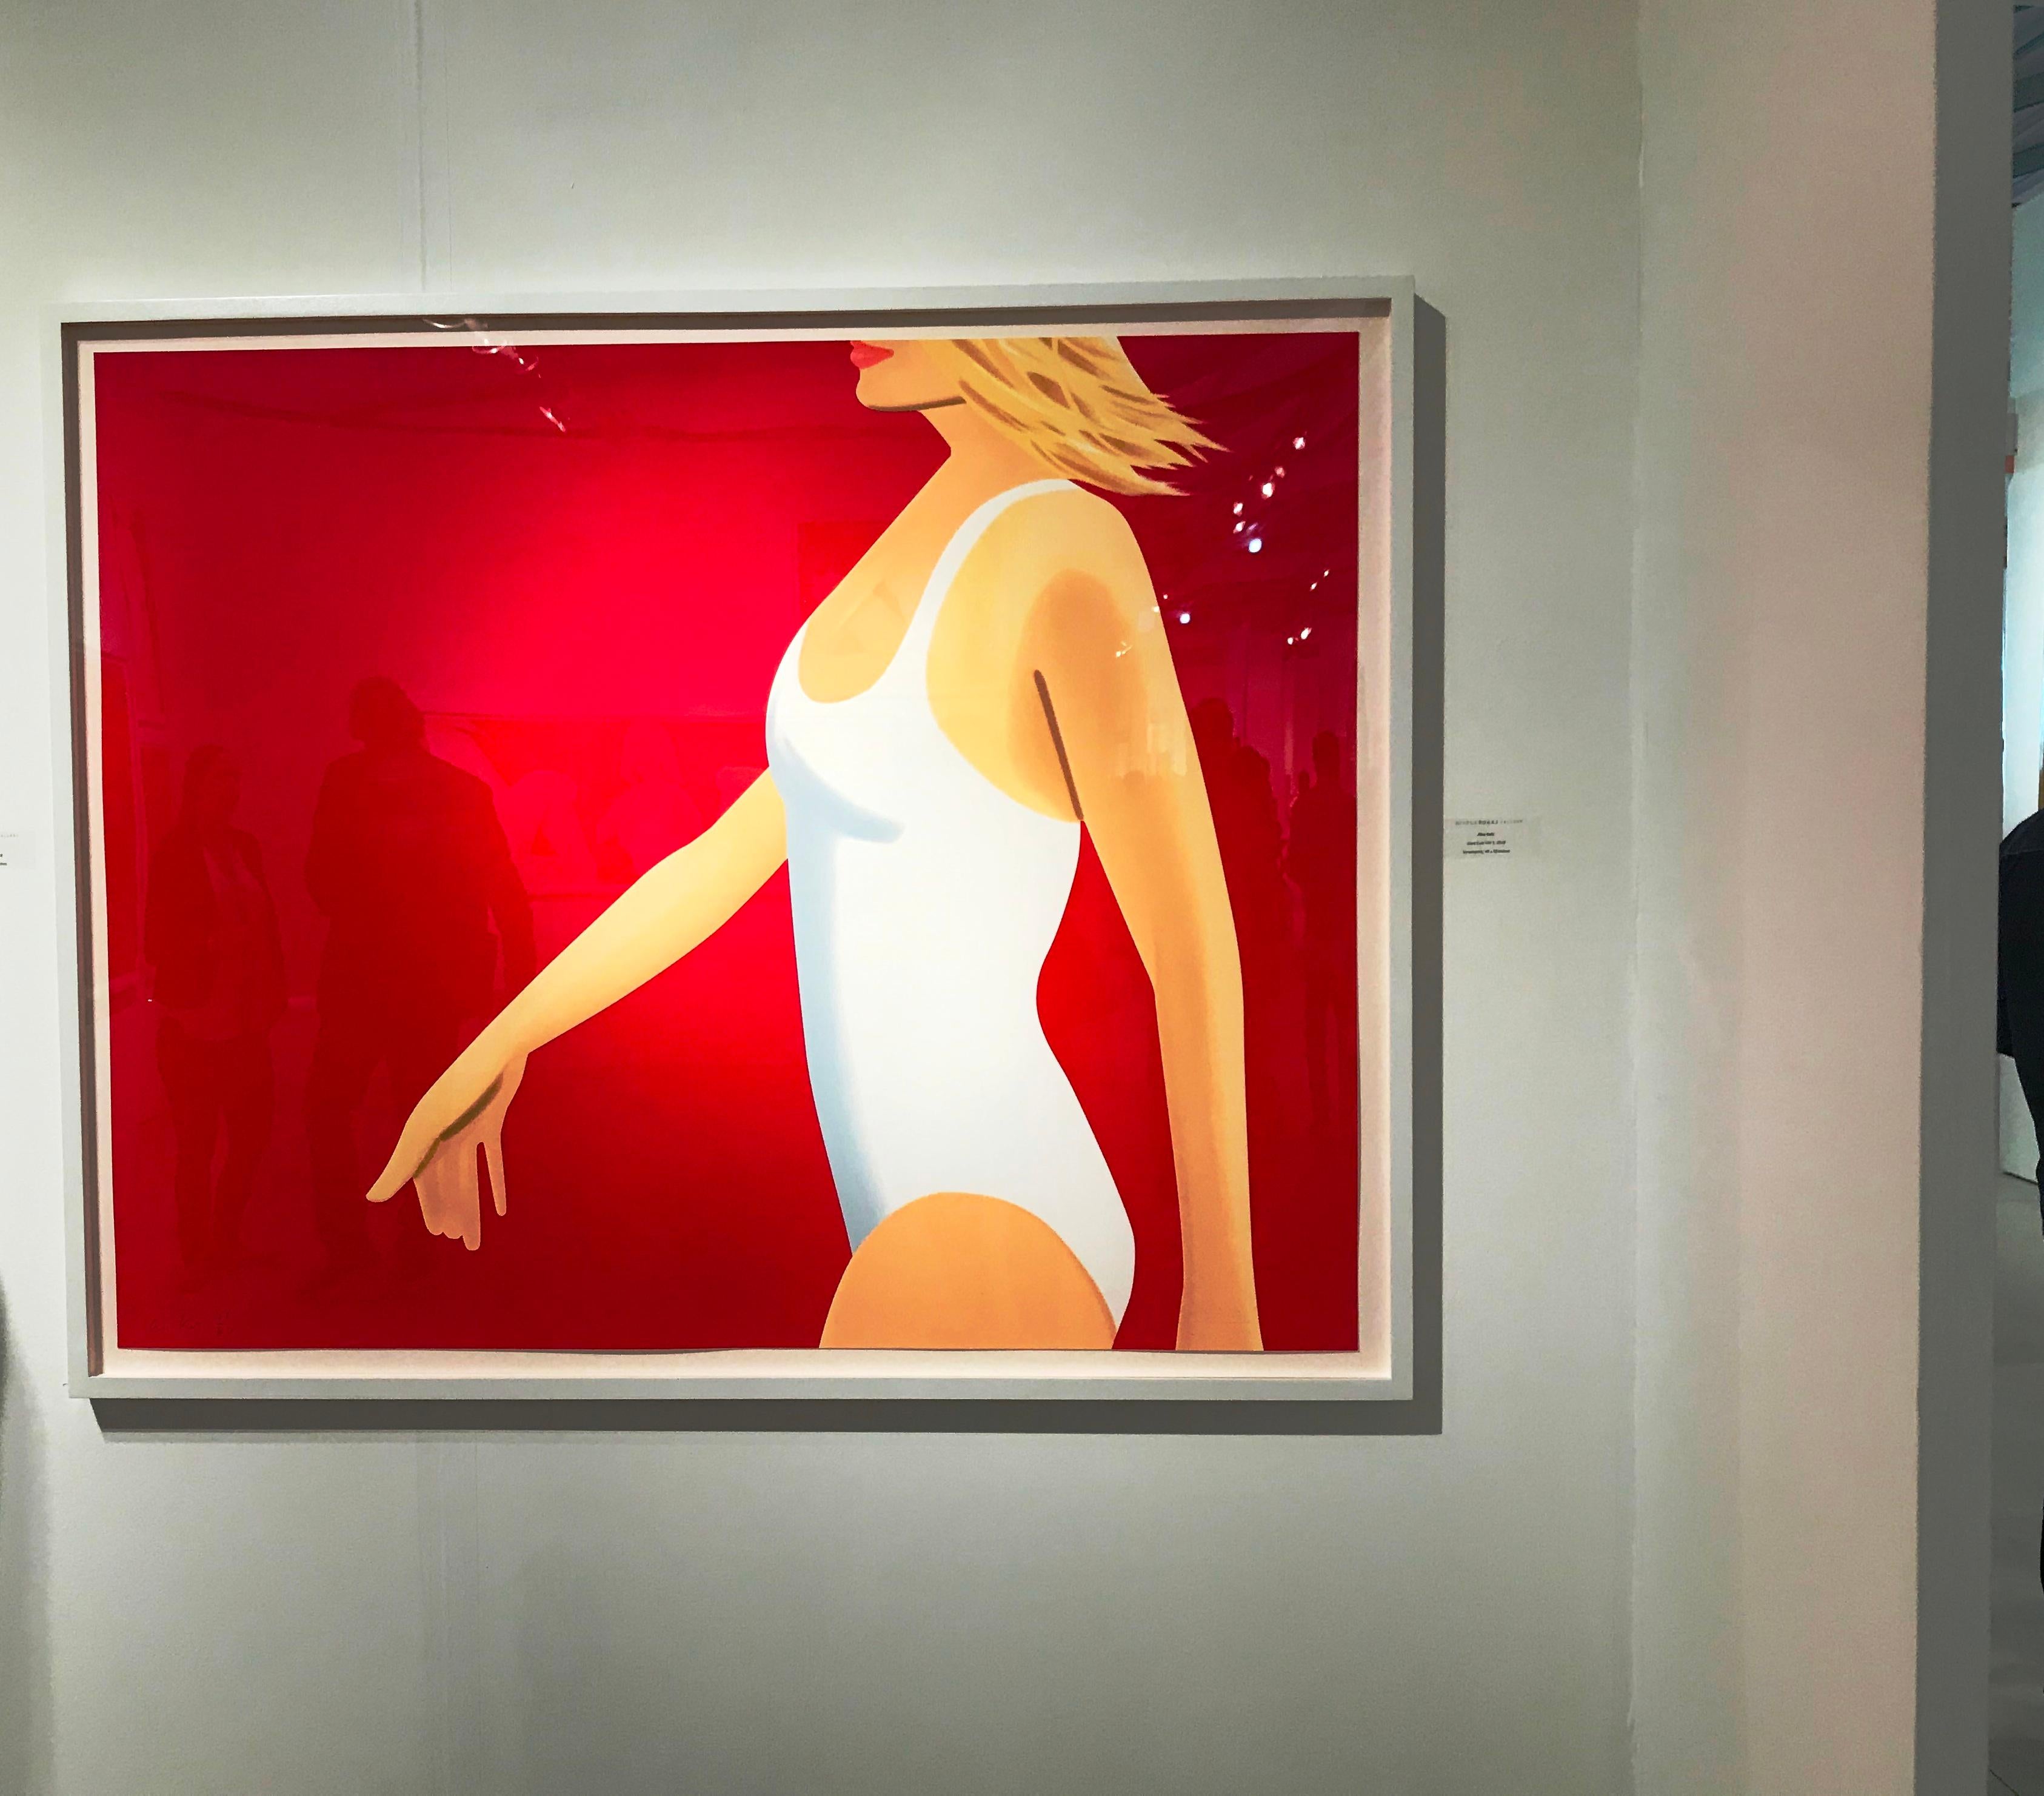 Alex Katz's newest series of works is red and fun and very characteristic of his famous figures.  It is framed in a white shadow box frame and white mat.  From an edition of only 60 works worldwide, this is poised to be an incredibly popular series